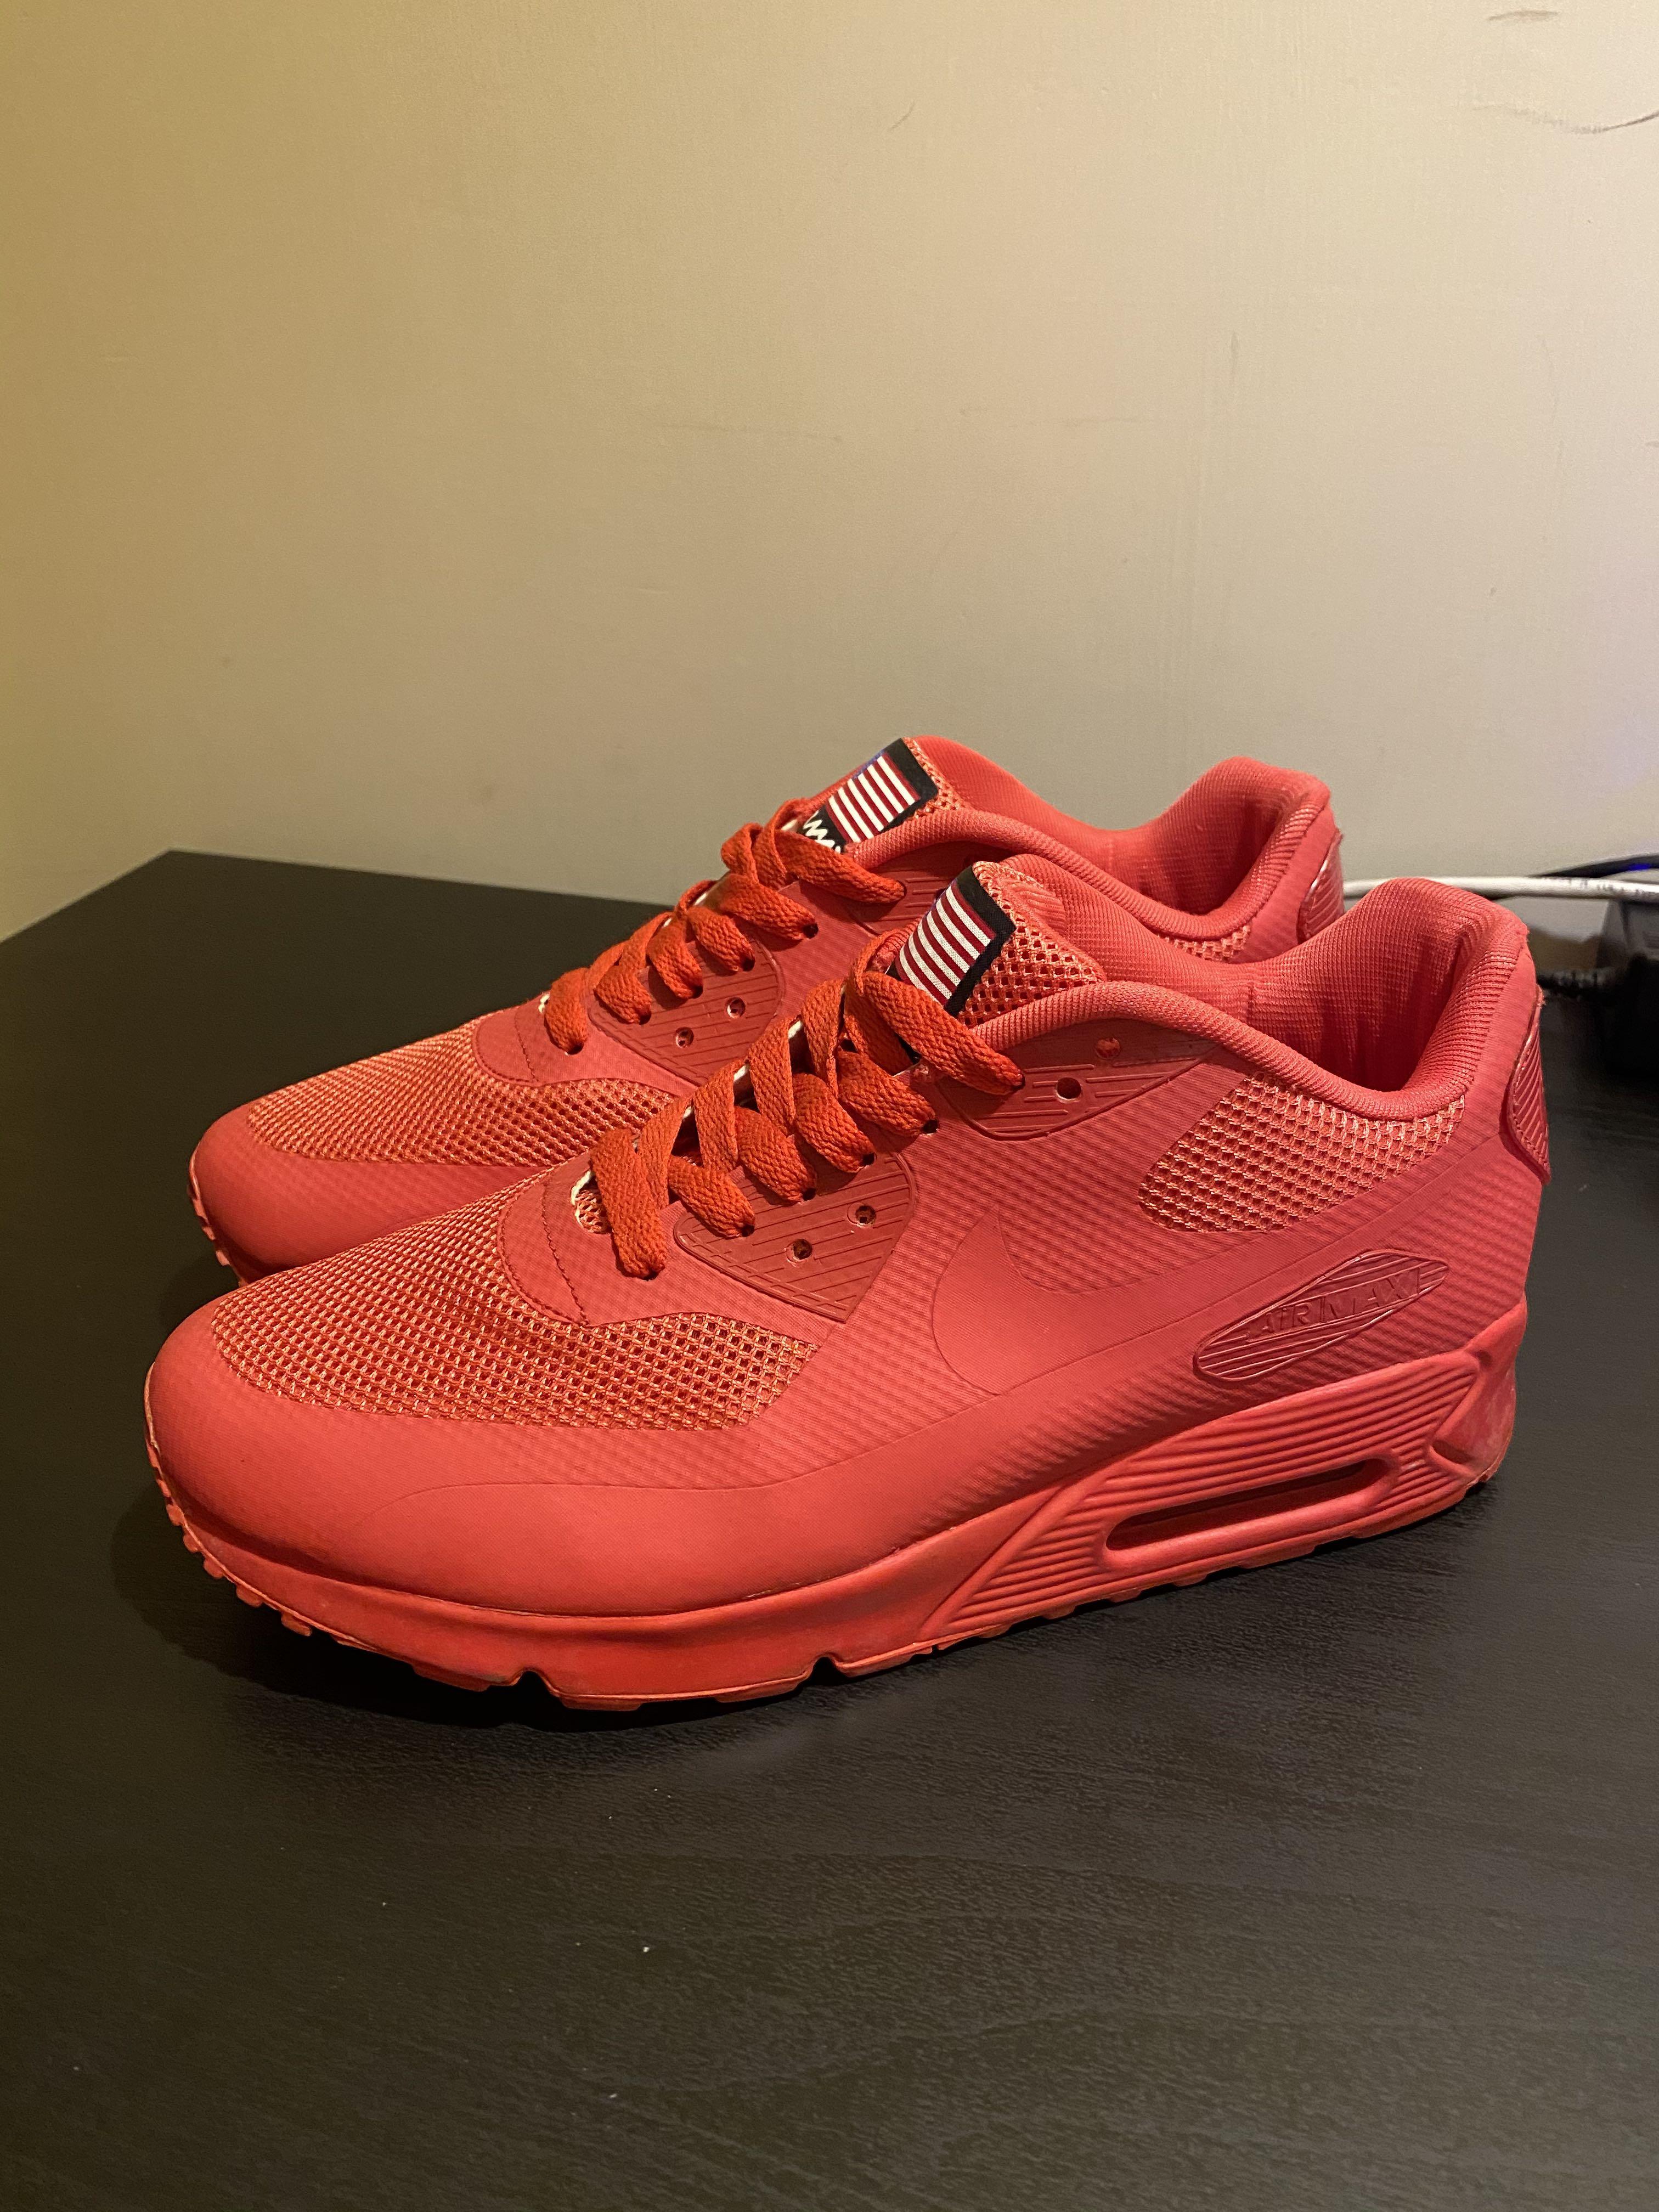 nike air max 90 independence day red